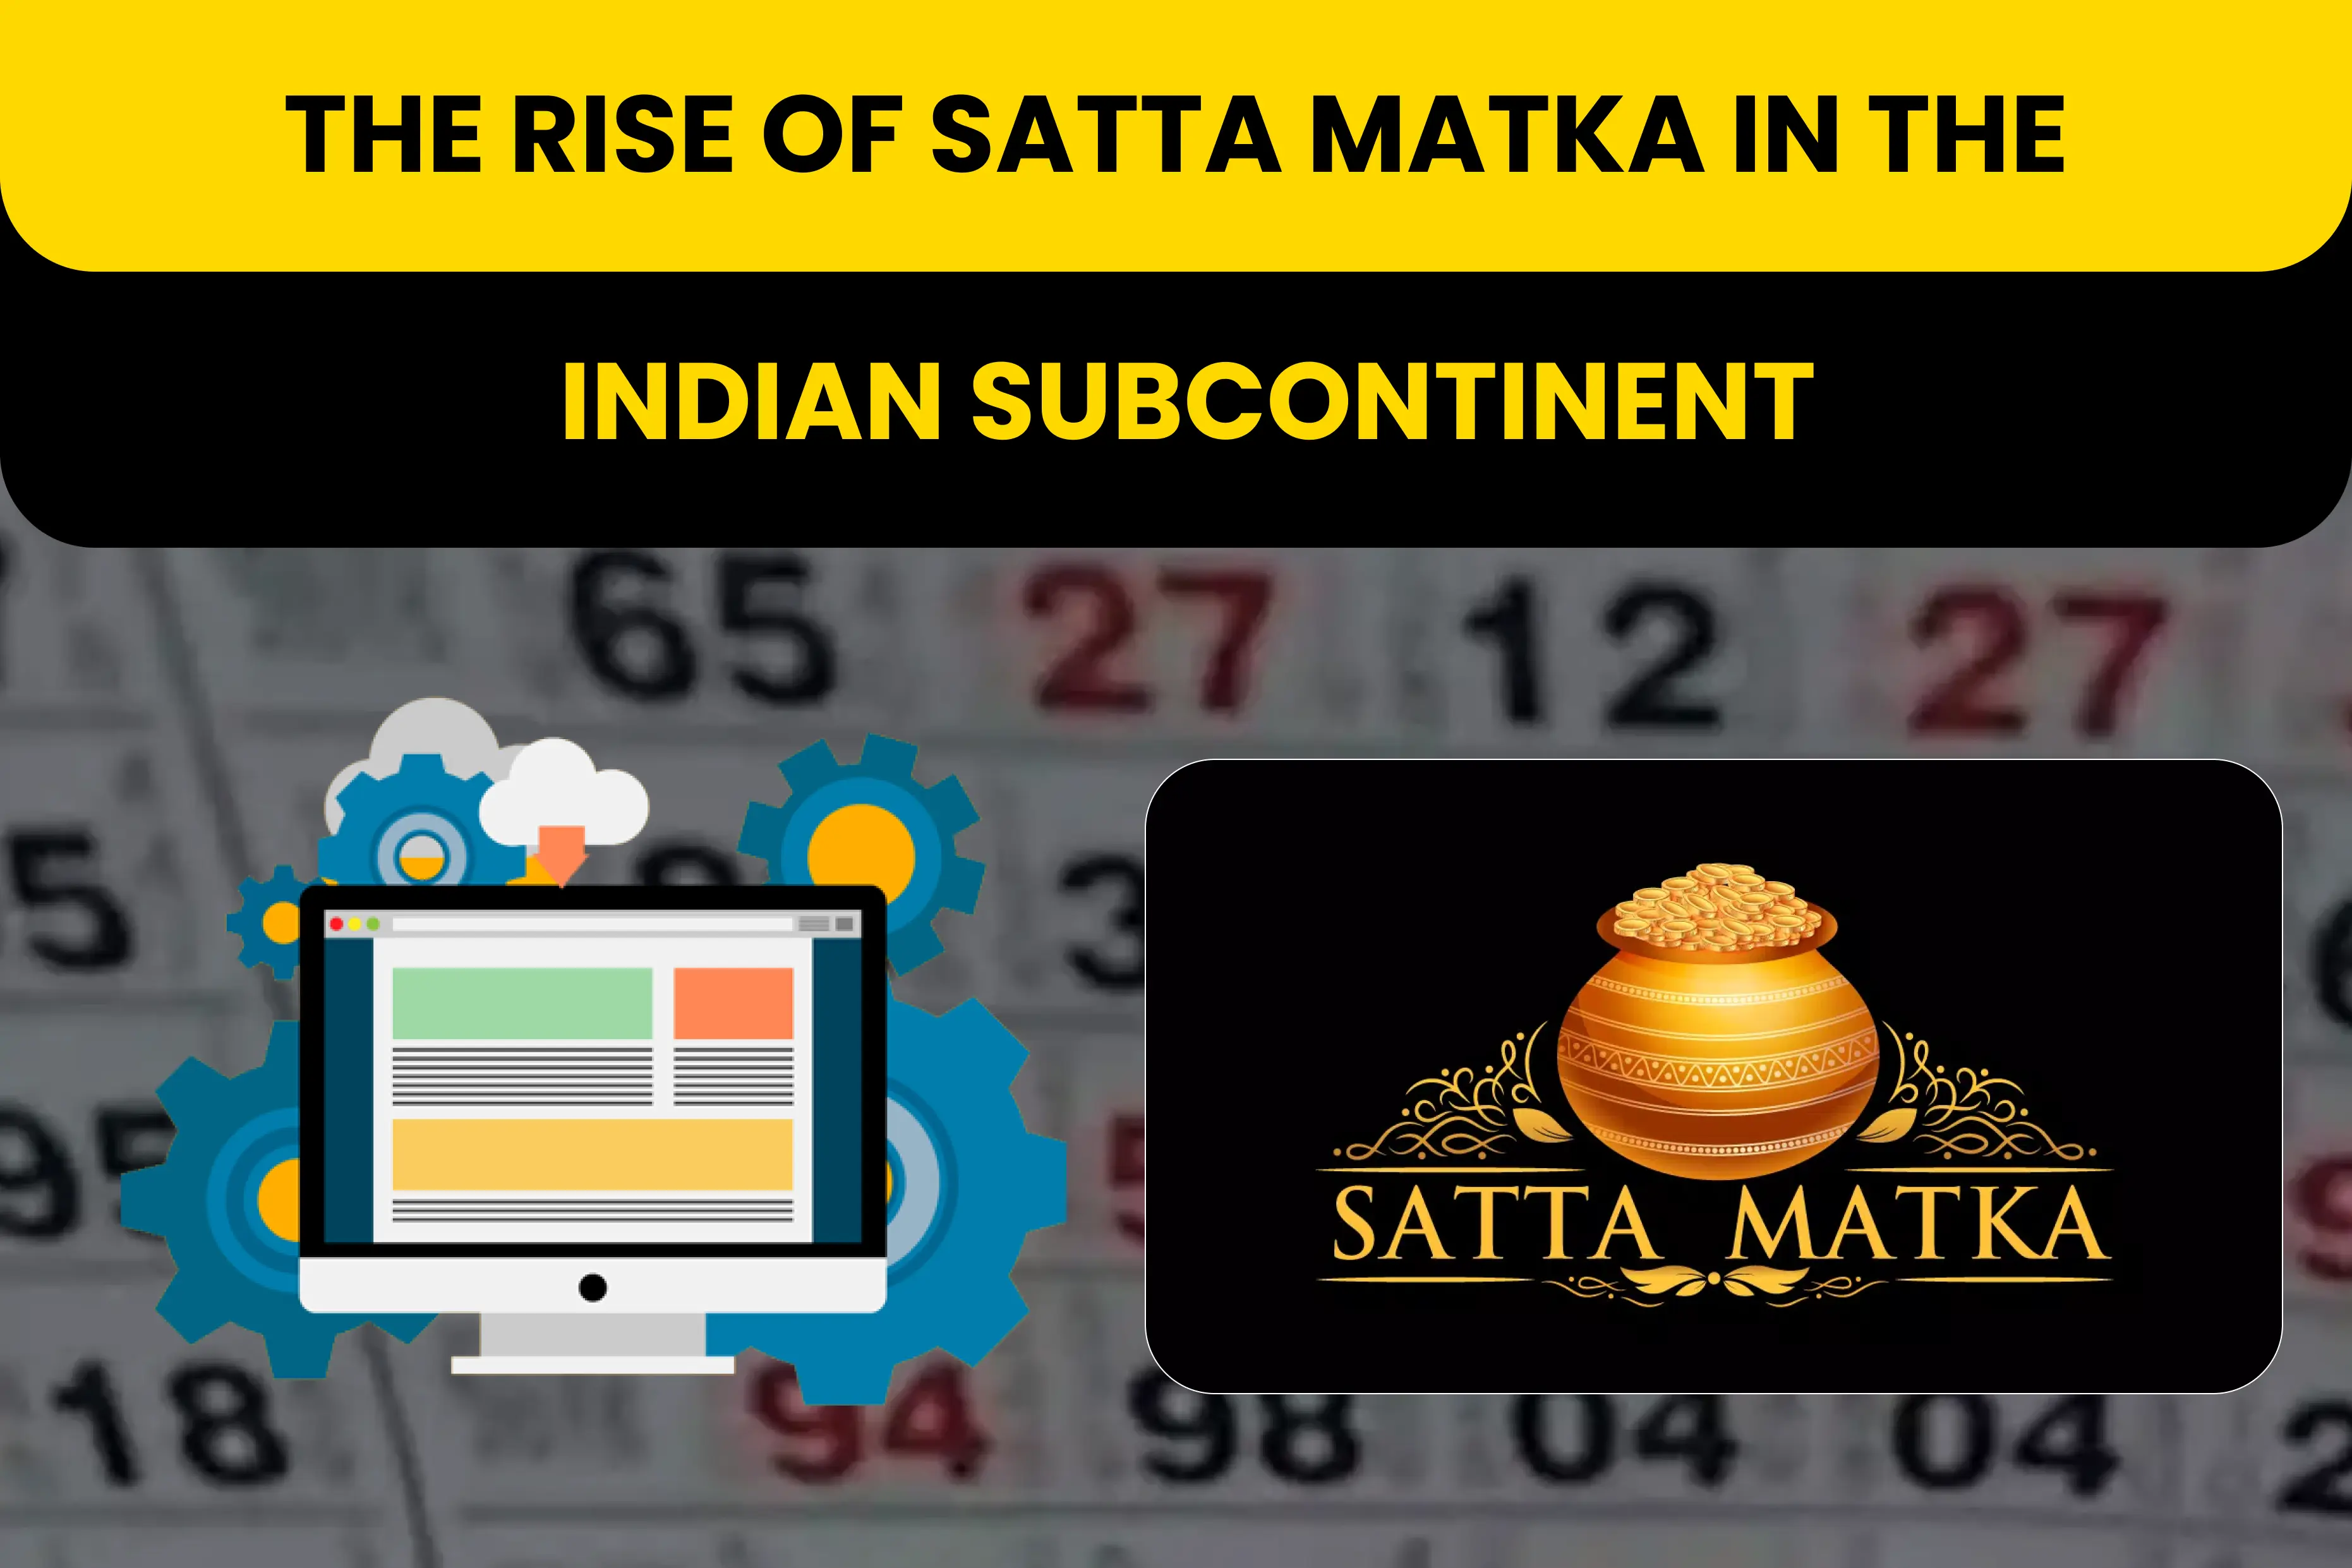 The Rise of Satta Matka in the Indian Subcontinent